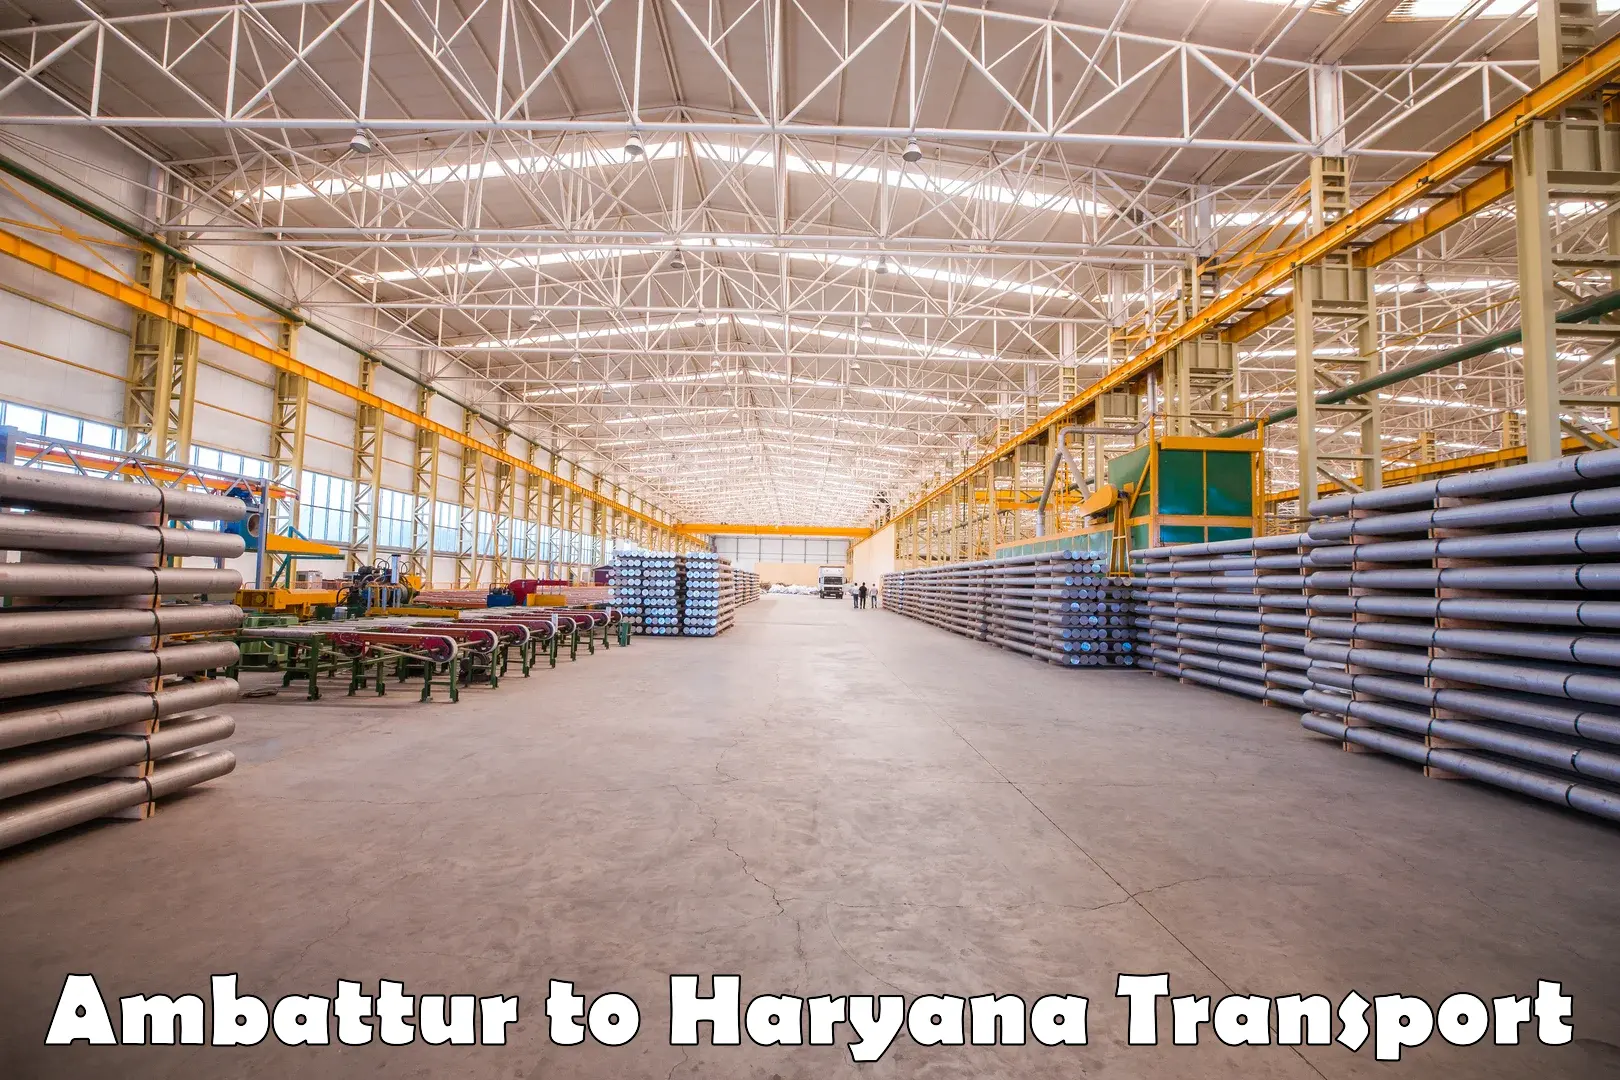 Goods delivery service Ambattur to NCR Haryana